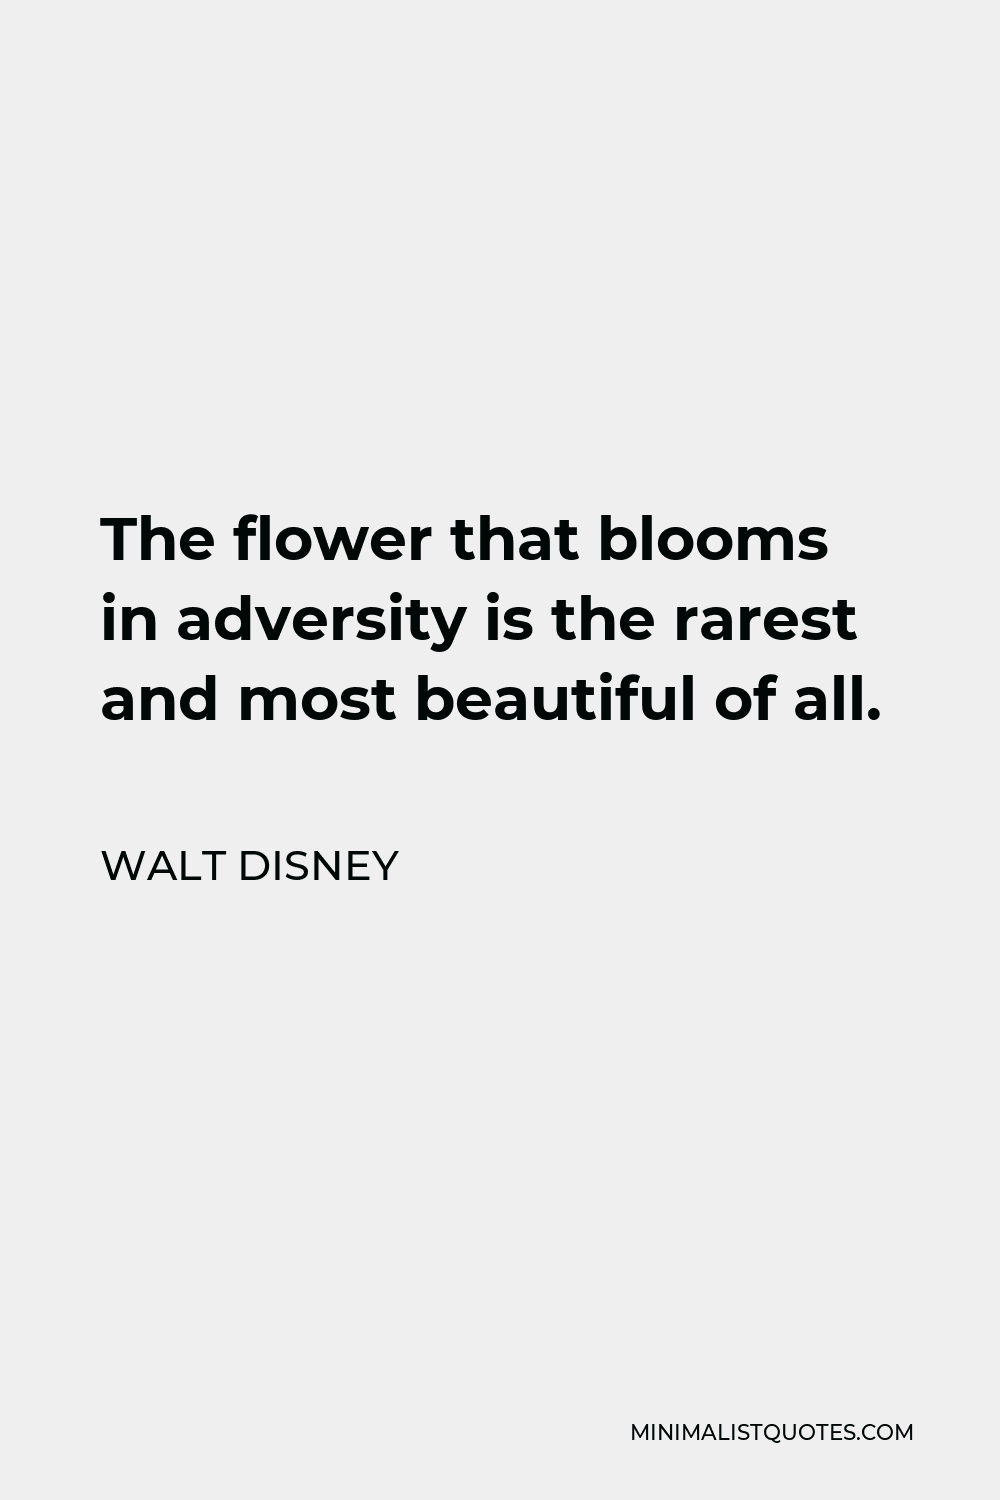 Walt Disney Quote - The flower that blooms in adversity is the rarest and most beautiful of all.